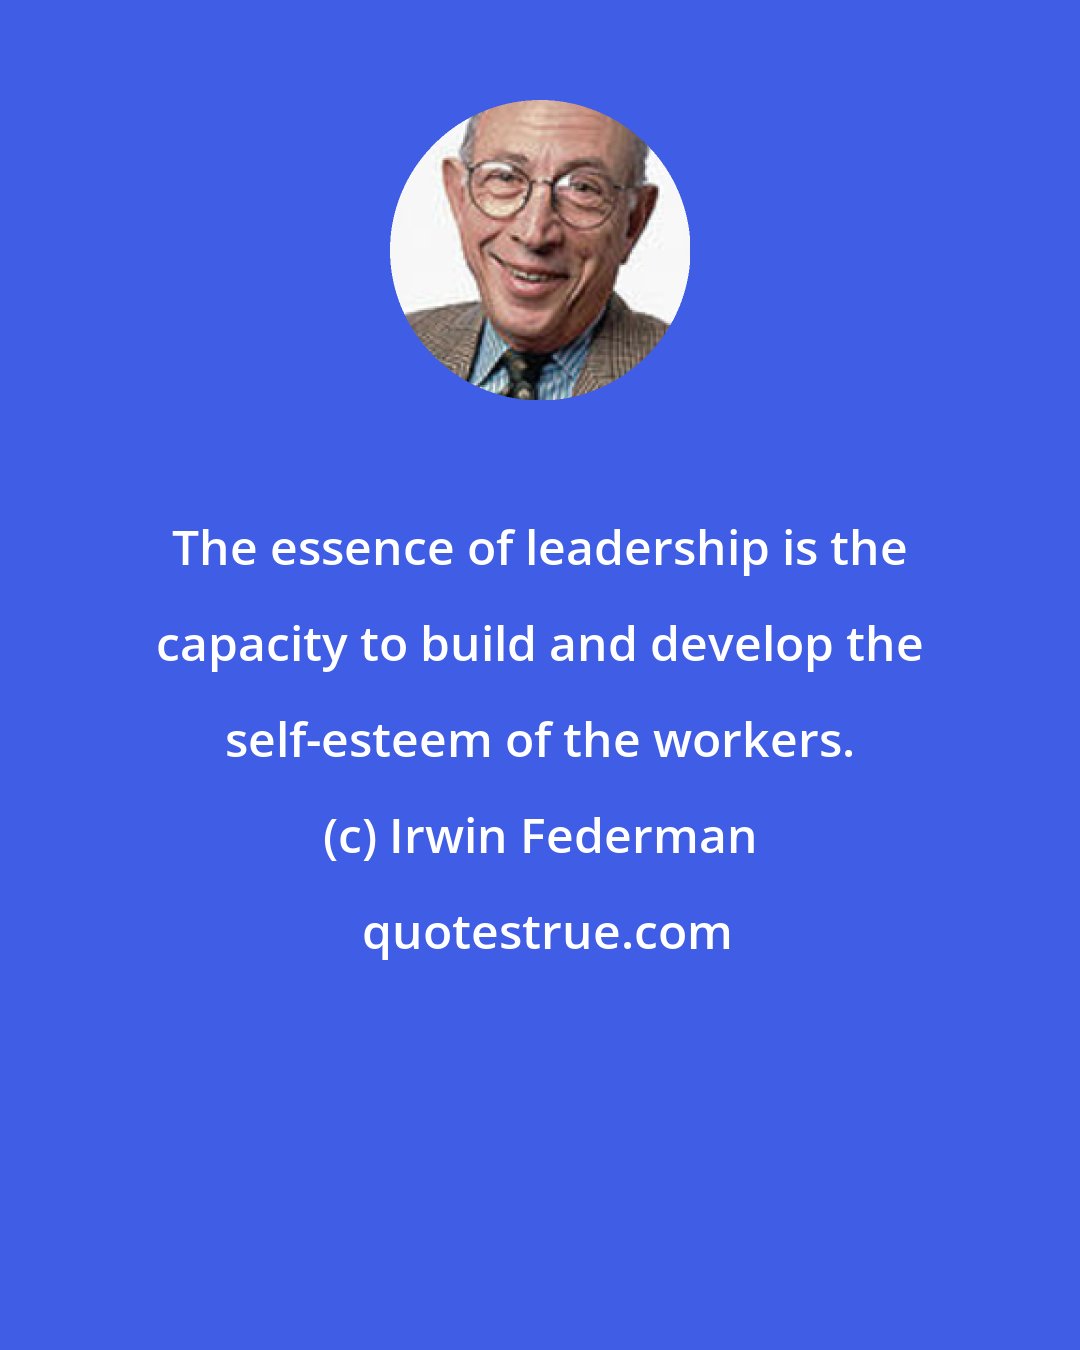 Irwin Federman: The essence of leadership is the capacity to build and develop the self-esteem of the workers.